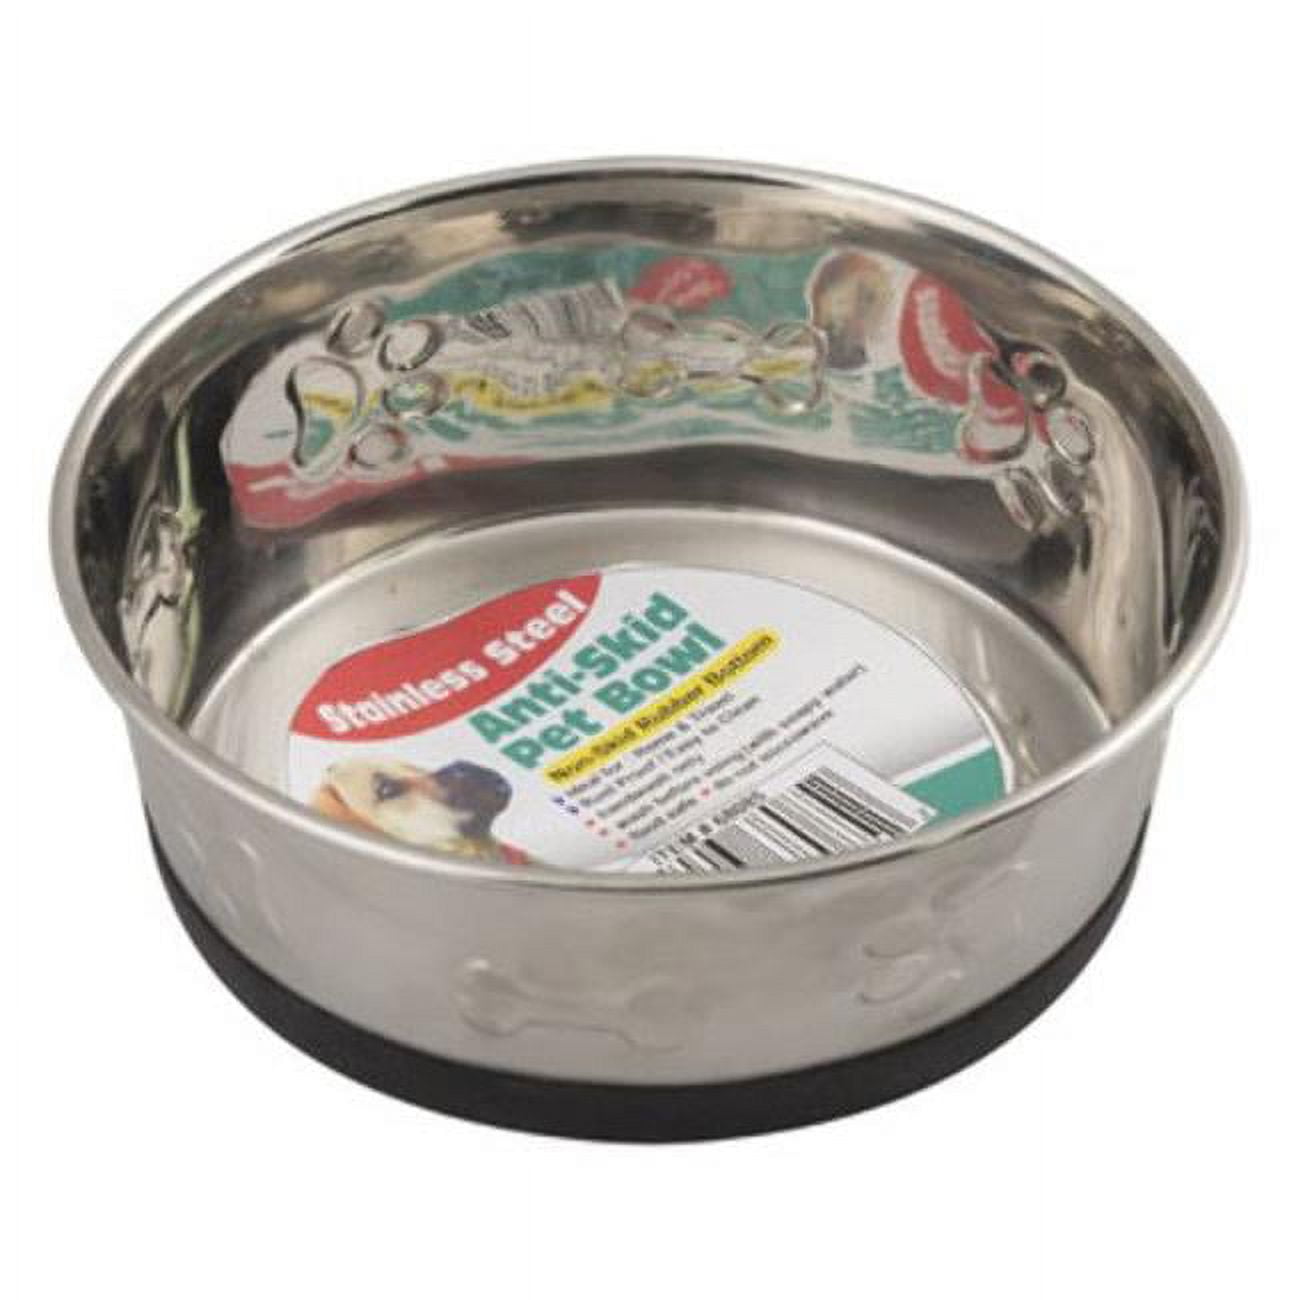 2324878 28 Oz Stainless Steel Pet Bowl With Embossed Paw Prints, Silver - Case Of 24 - 24 Per Pack